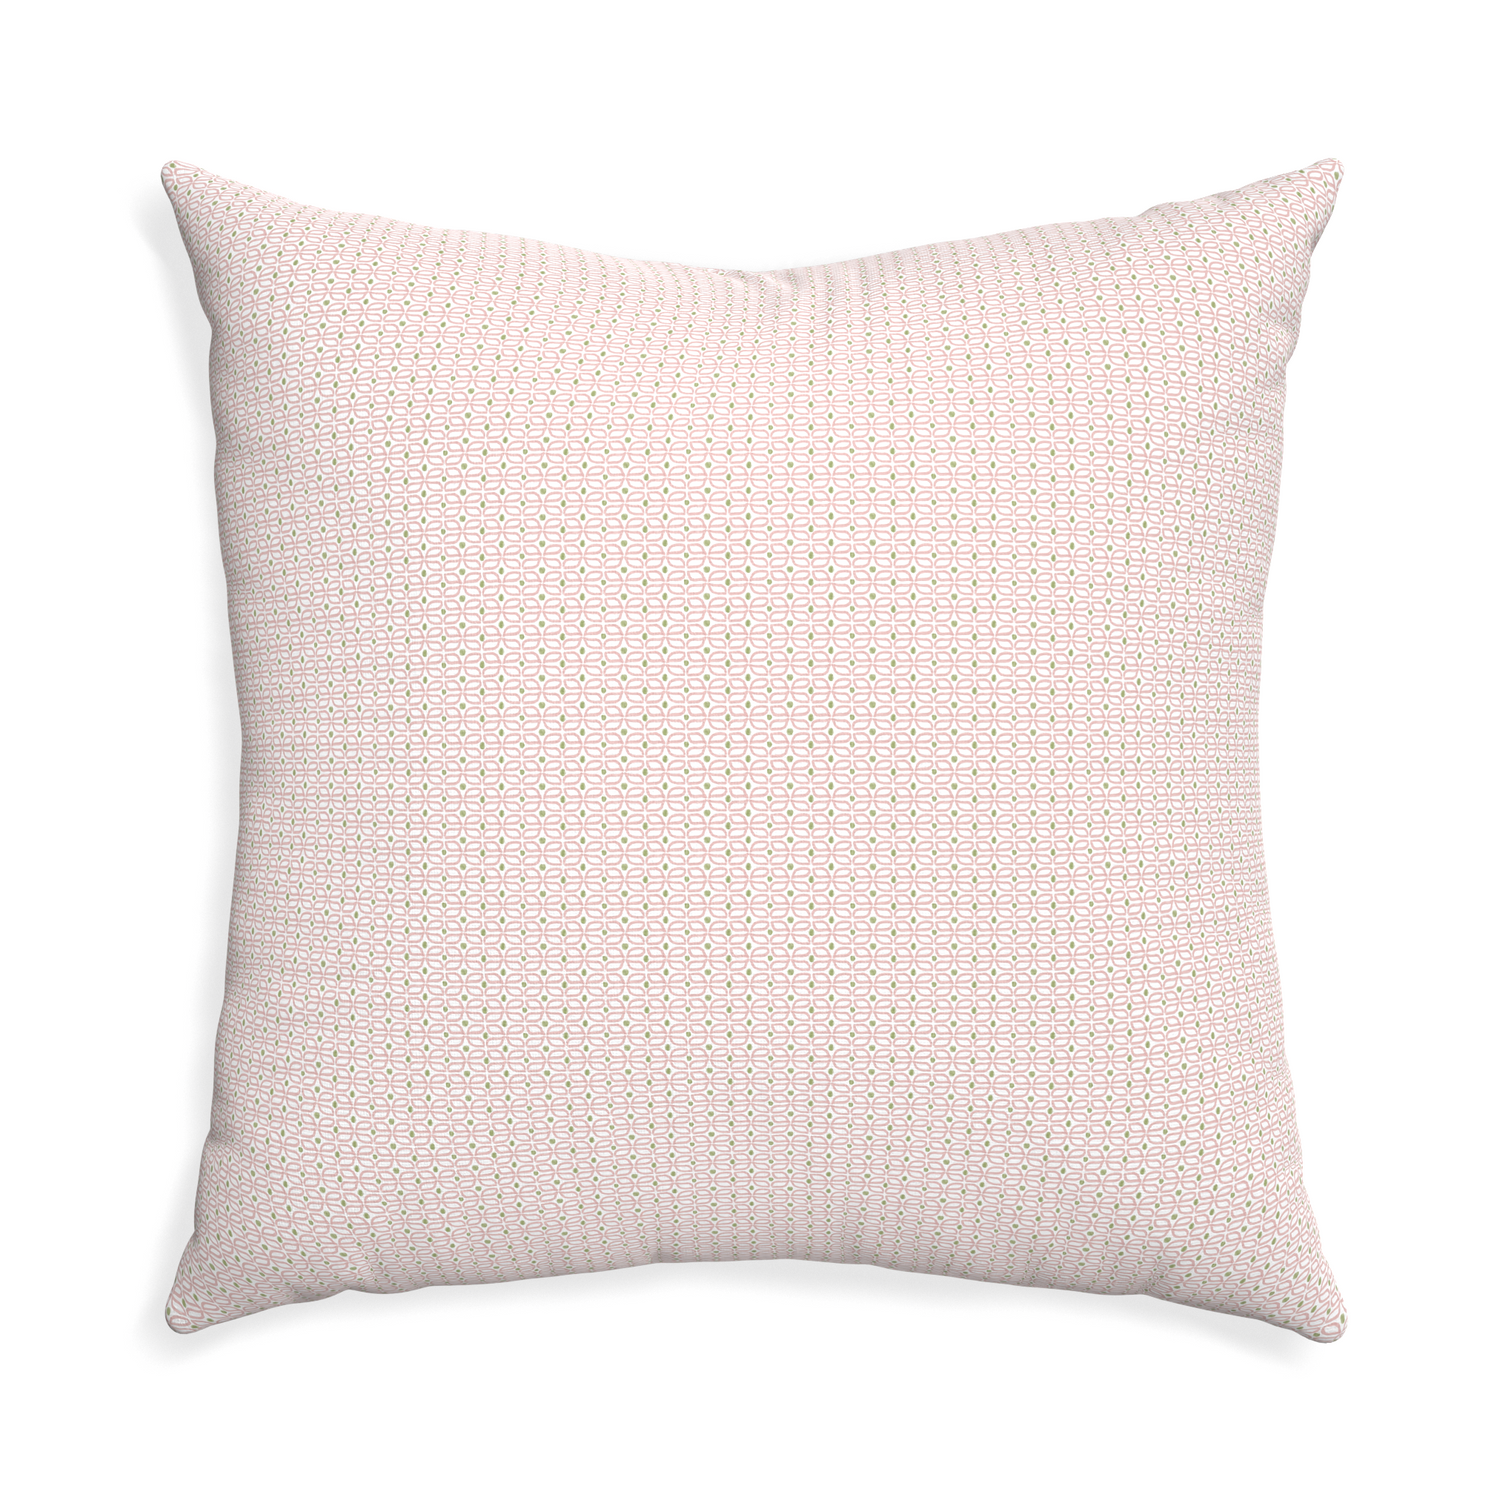 Euro-sham loomi pink custom pink geometricpillow with none on white background